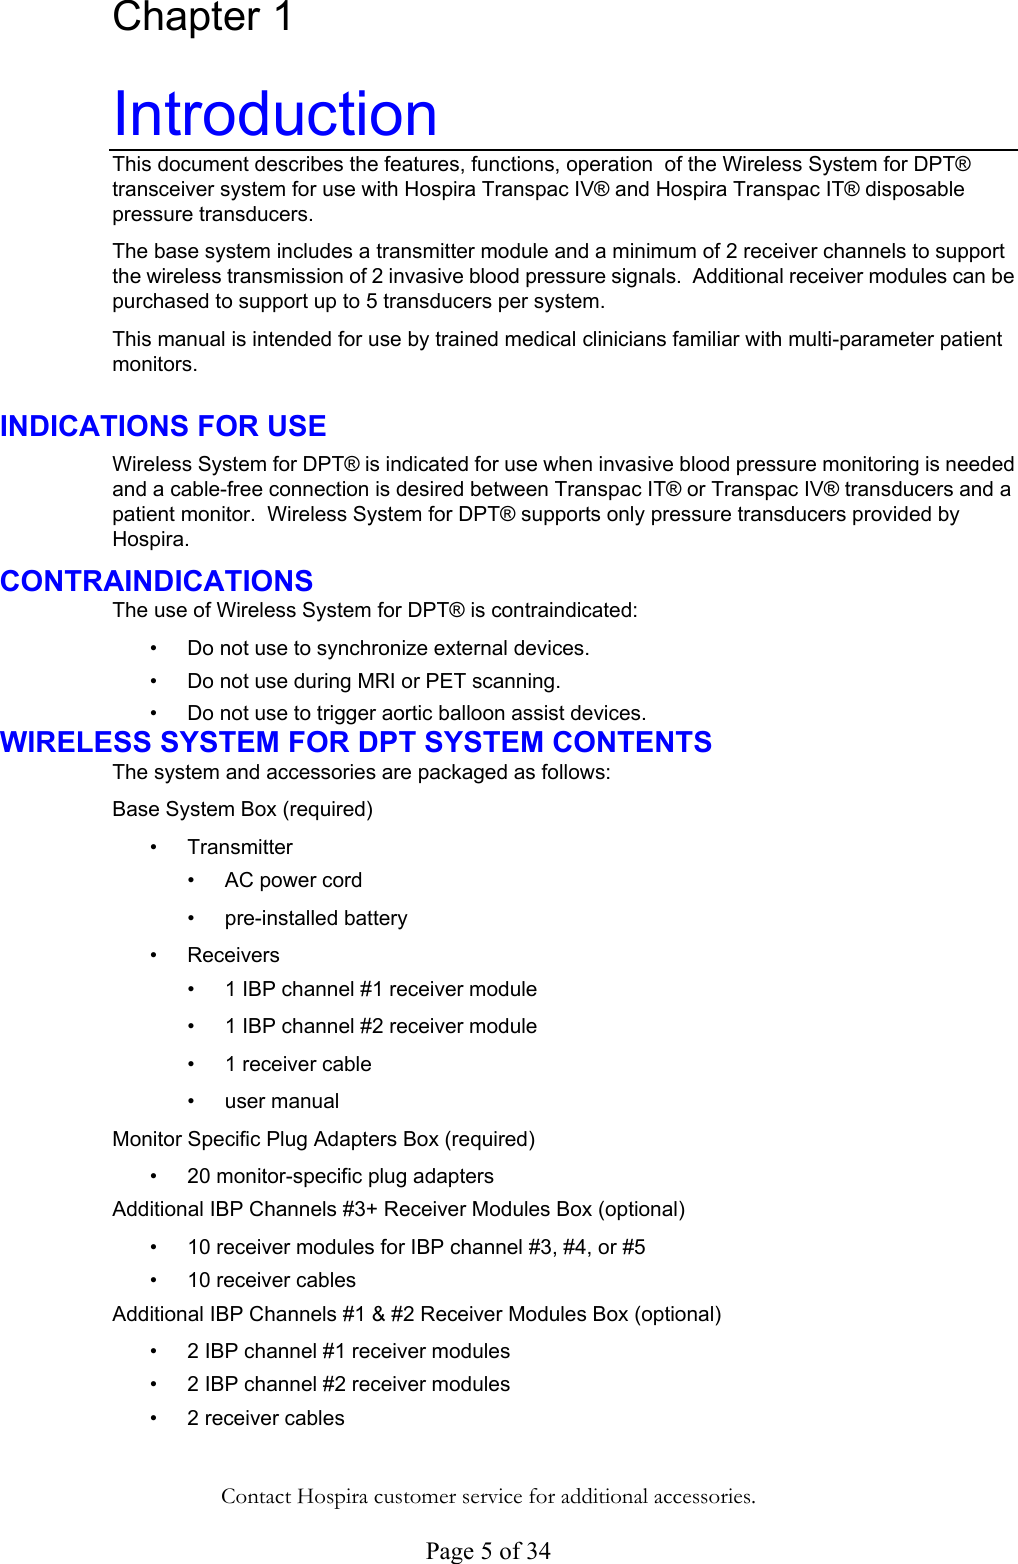  Page 5 of 34 Chapter 1 Introduction This document describes the features, functions, operation  of the Wireless System for DPT® transceiver system for use with Hospira Transpac IV® and Hospira Transpac IT® disposable pressure transducers.  The base system includes a transmitter module and a minimum of 2 receiver channels to support the wireless transmission of 2 invasive blood pressure signals.  Additional receiver modules can be purchased to support up to 5 transducers per system. This manual is intended for use by trained medical clinicians familiar with multi-parameter patient monitors. INDICATIONS FOR USE Wireless System for DPT® is indicated for use when invasive blood pressure monitoring is needed and a cable-free connection is desired between Transpac IT® or Transpac IV® transducers and a patient monitor.  Wireless System for DPT® supports only pressure transducers provided by Hospira. CONTRAINDICATIONS The use of Wireless System for DPT® is contraindicated: • • • • •  •  • •  •  •  •  • • • • • • Do not use to synchronize external devices. Do not use during MRI or PET scanning. Do not use to trigger aortic balloon assist devices. WIRELESS SYSTEM FOR DPT SYSTEM CONTENTS The system and accessories are packaged as follows: Base System Box (required) Transmitter  AC power cord pre-installed battery Receivers  1 IBP channel #1 receiver module  1 IBP channel #2 receiver module 1 receiver cable  user manual Monitor Specific Plug Adapters Box (required) 20 monitor-specific plug adapters Additional IBP Channels #3+ Receiver Modules Box (optional)  10 receiver modules for IBP channel #3, #4, or #5 10 receiver cables  Additional IBP Channels #1 &amp; #2 Receiver Modules Box (optional) 2 IBP channel #1 receiver modules 2 IBP channel #2 receiver modules 2 receiver cables  Contact Hospira customer service for additional accessories. 